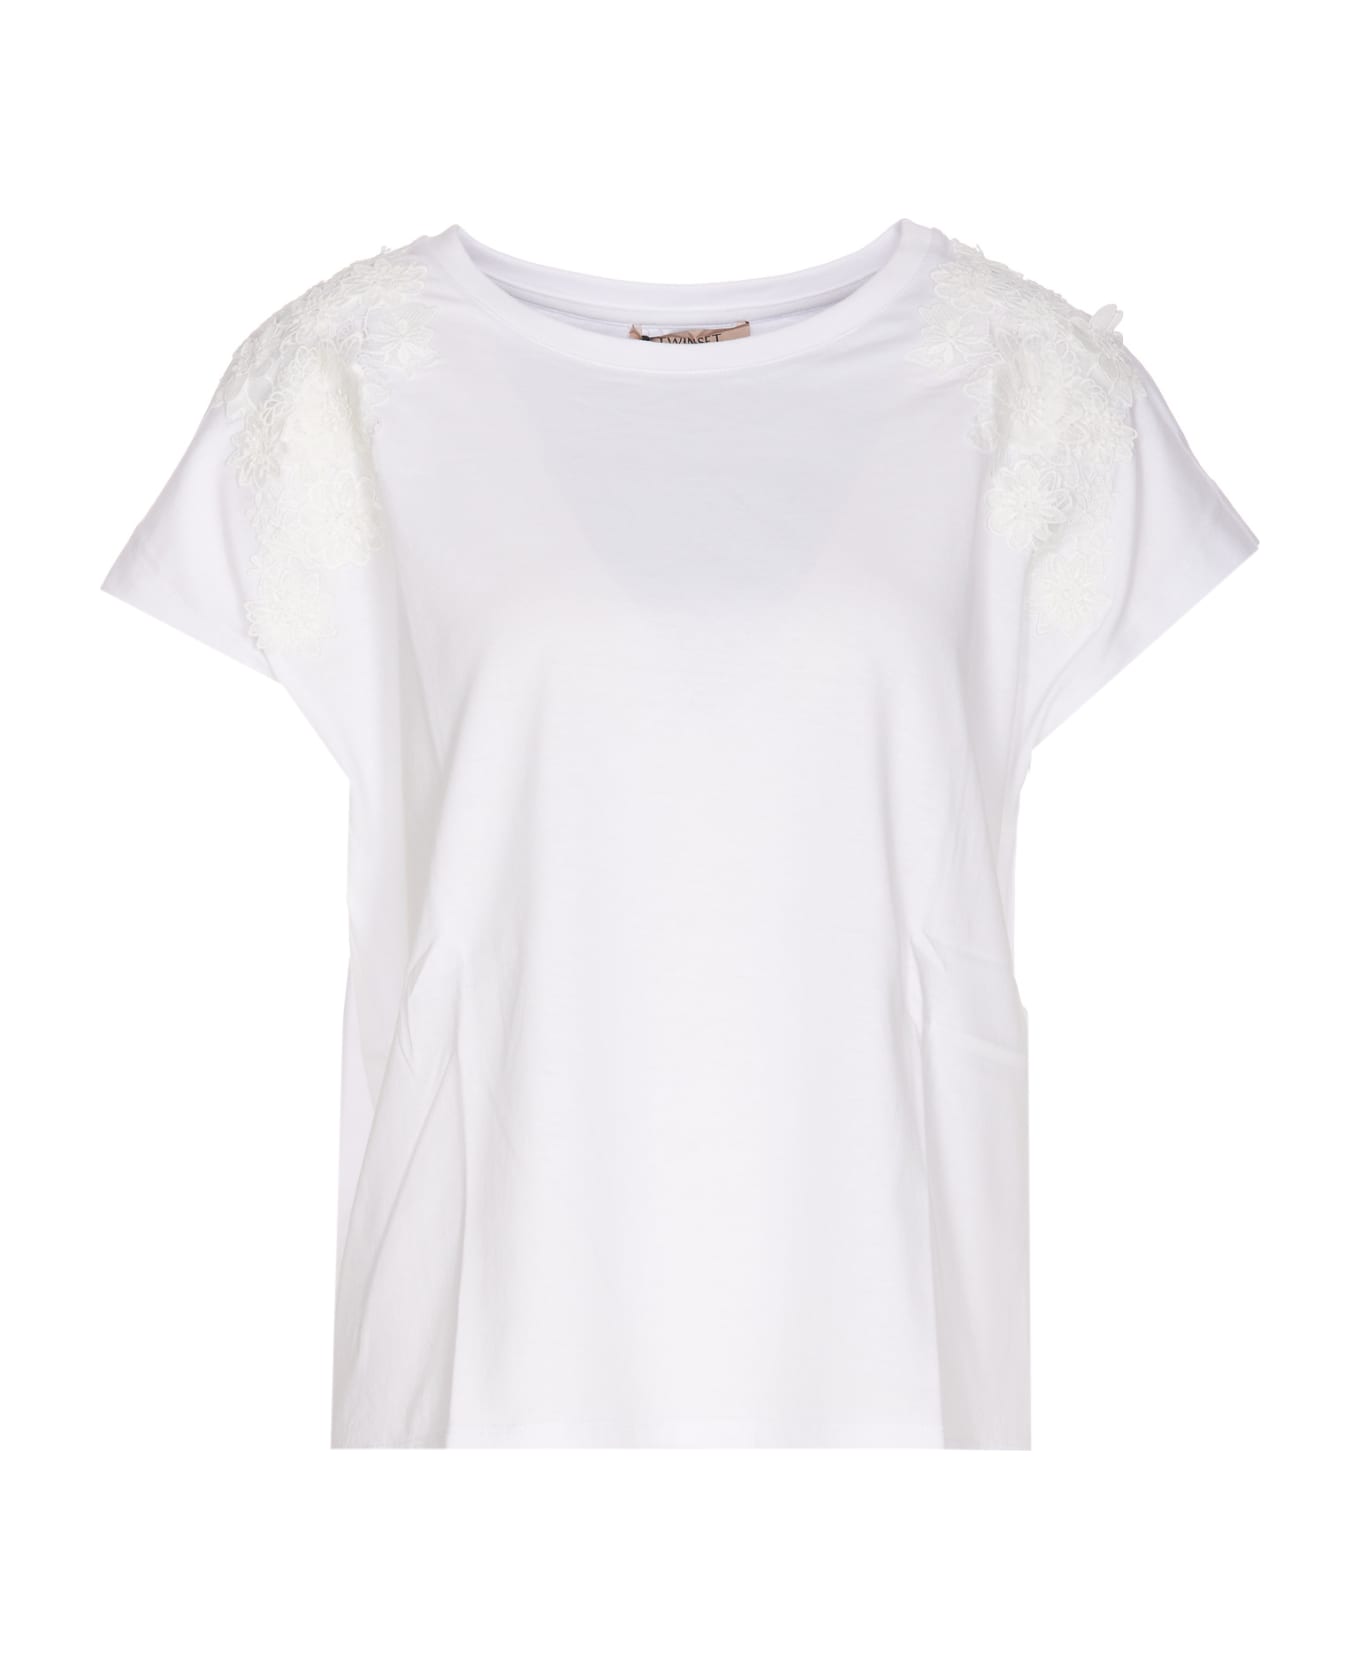 TwinSet T-shirt With Lace Details - Bianco